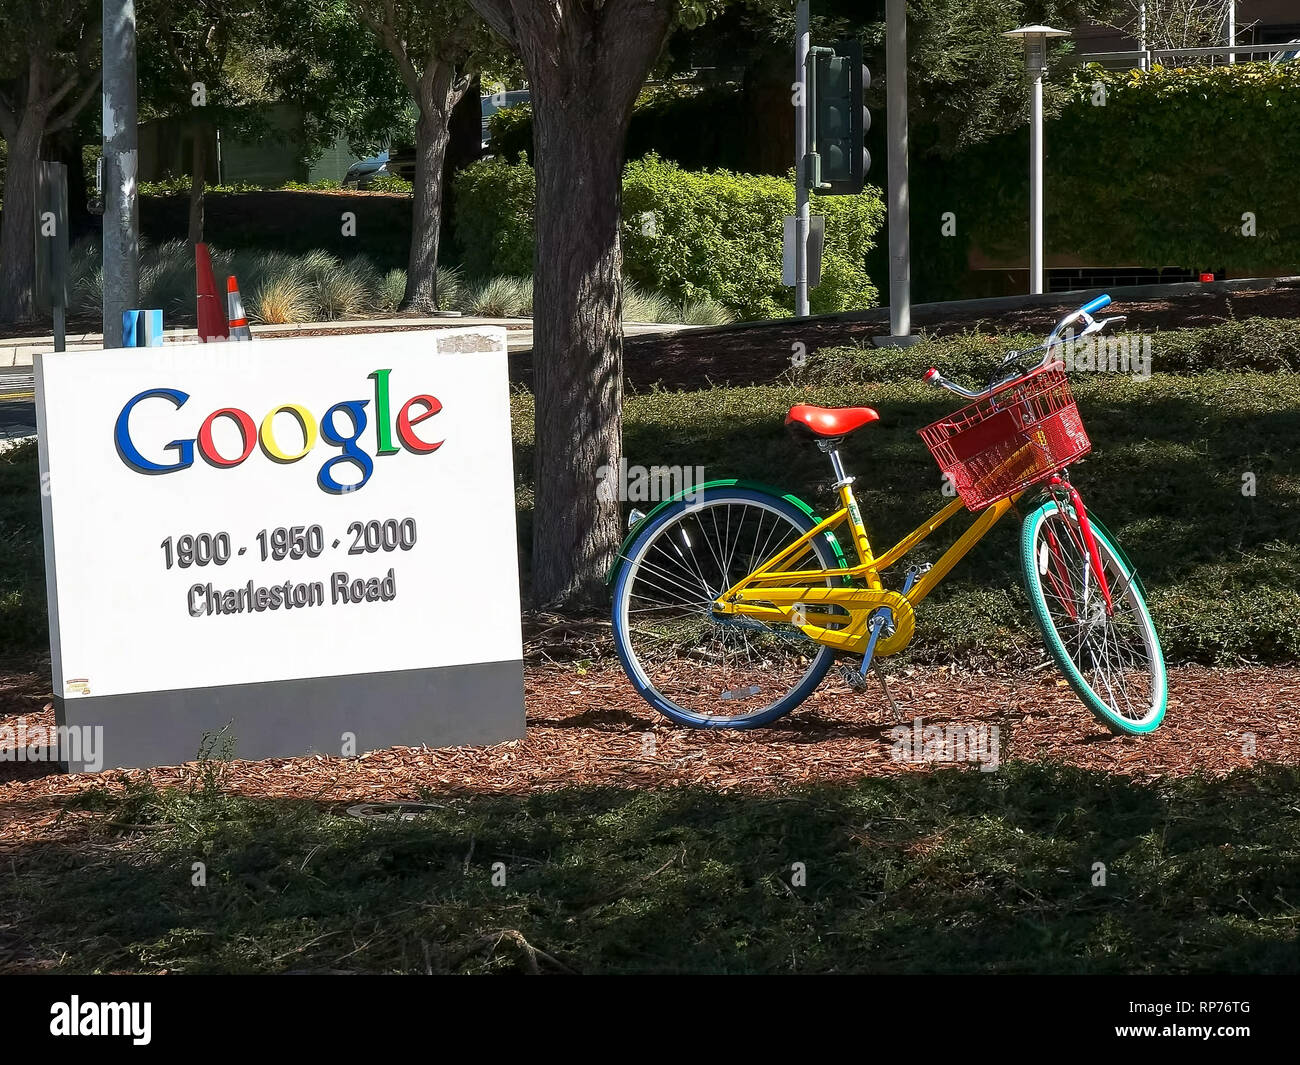 MOUNTAIN VIEW, CA, USA - AUGUST 28, 2015: close up of a sign and bicycle outside google headquarters building Stock Photo